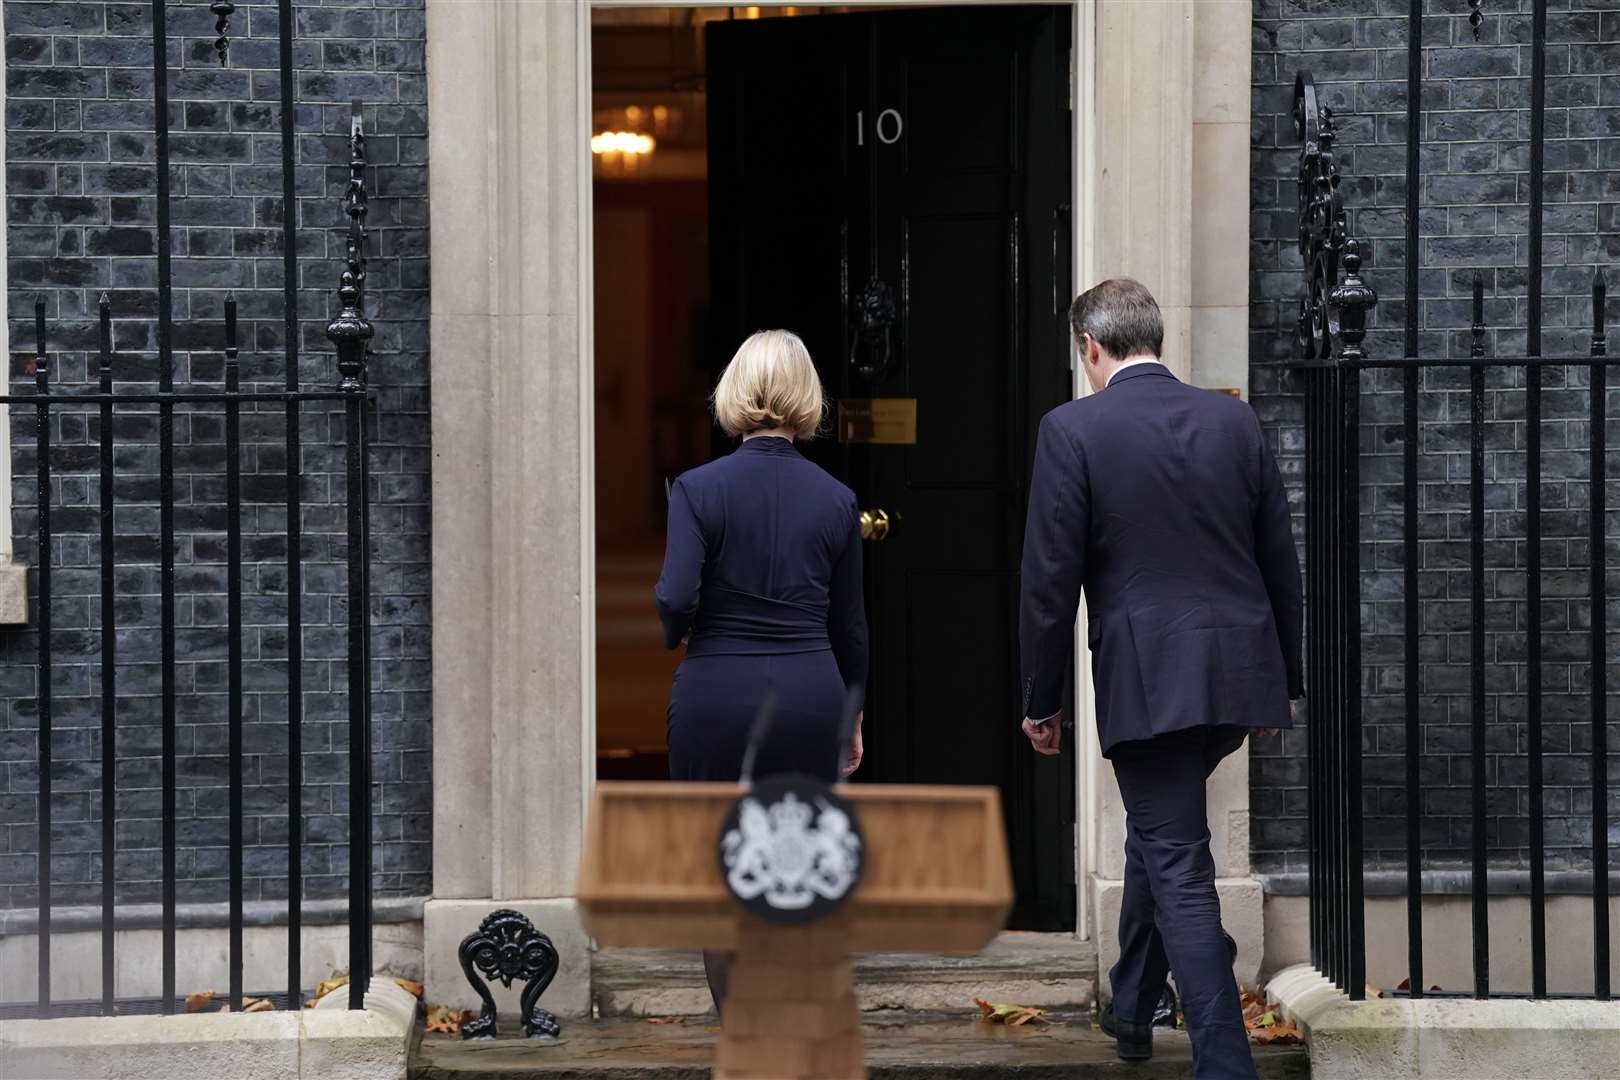 Liz Truss, with her husband Hugh O’Leary, walks back into 10 Downing Street (Kirsty O’Connor/PA)